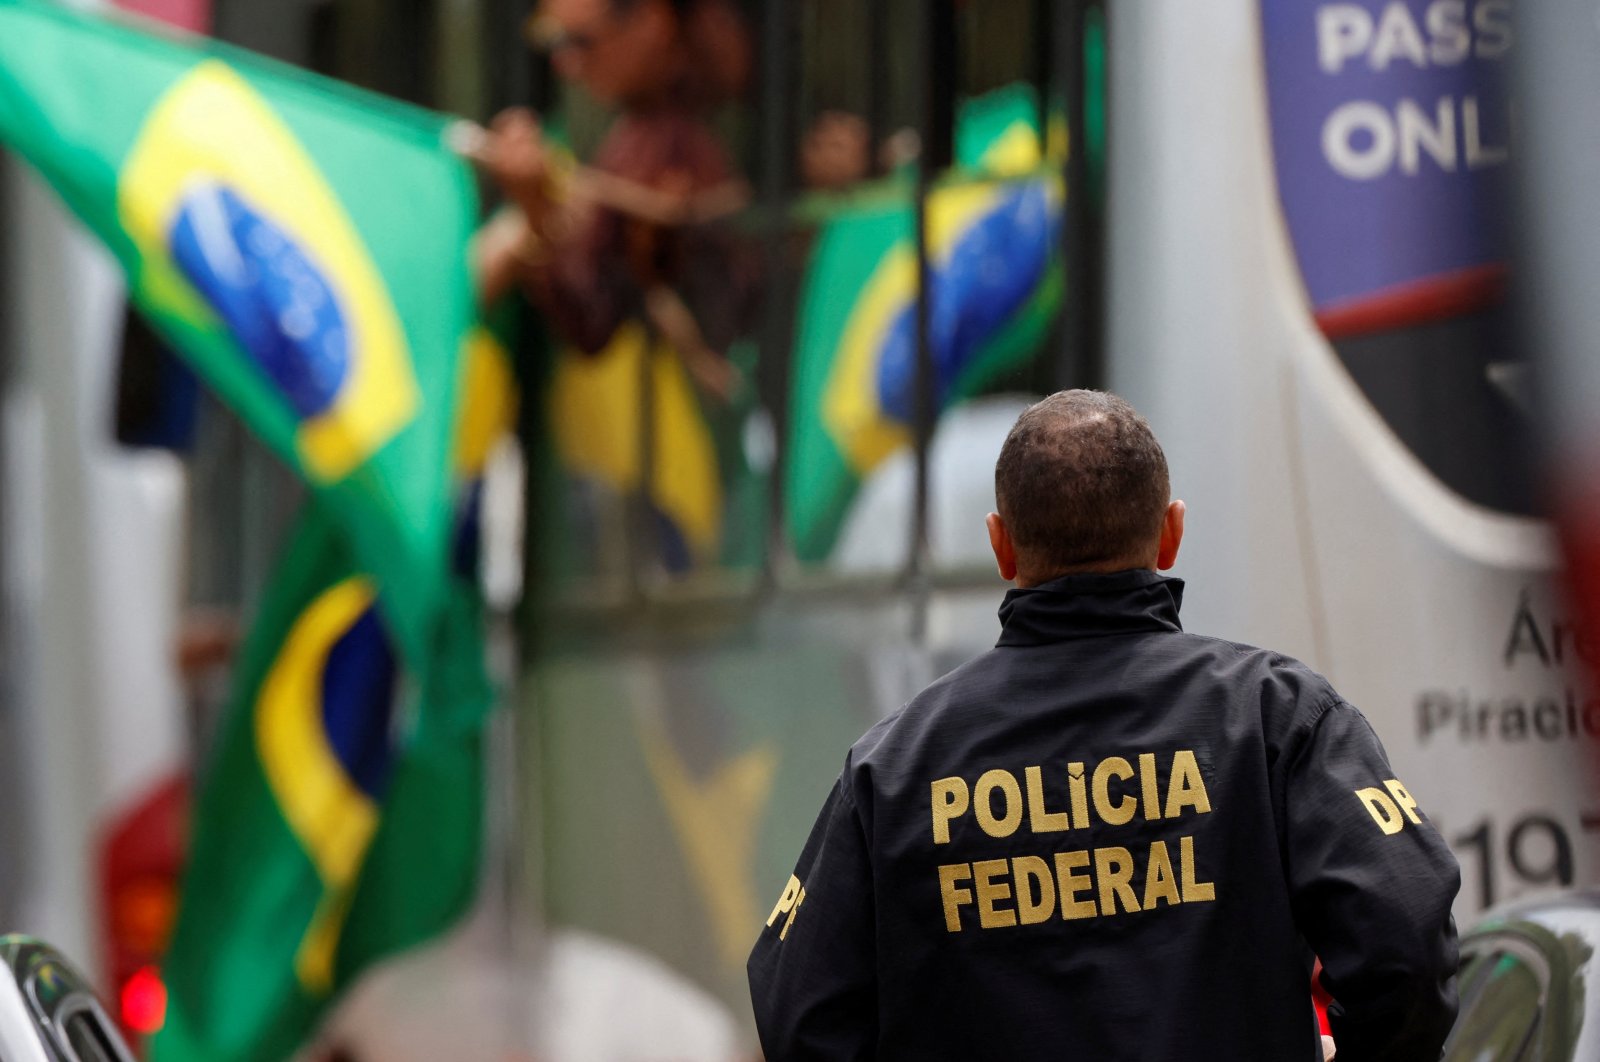 A member of the Federal Police looks on as supporters of Brazil's former President Jair Bolsonaro arrive at the National Academy of the Federal Police, Brasilia, Brazil, Jan. 9, 2023. (Reuters Photo)